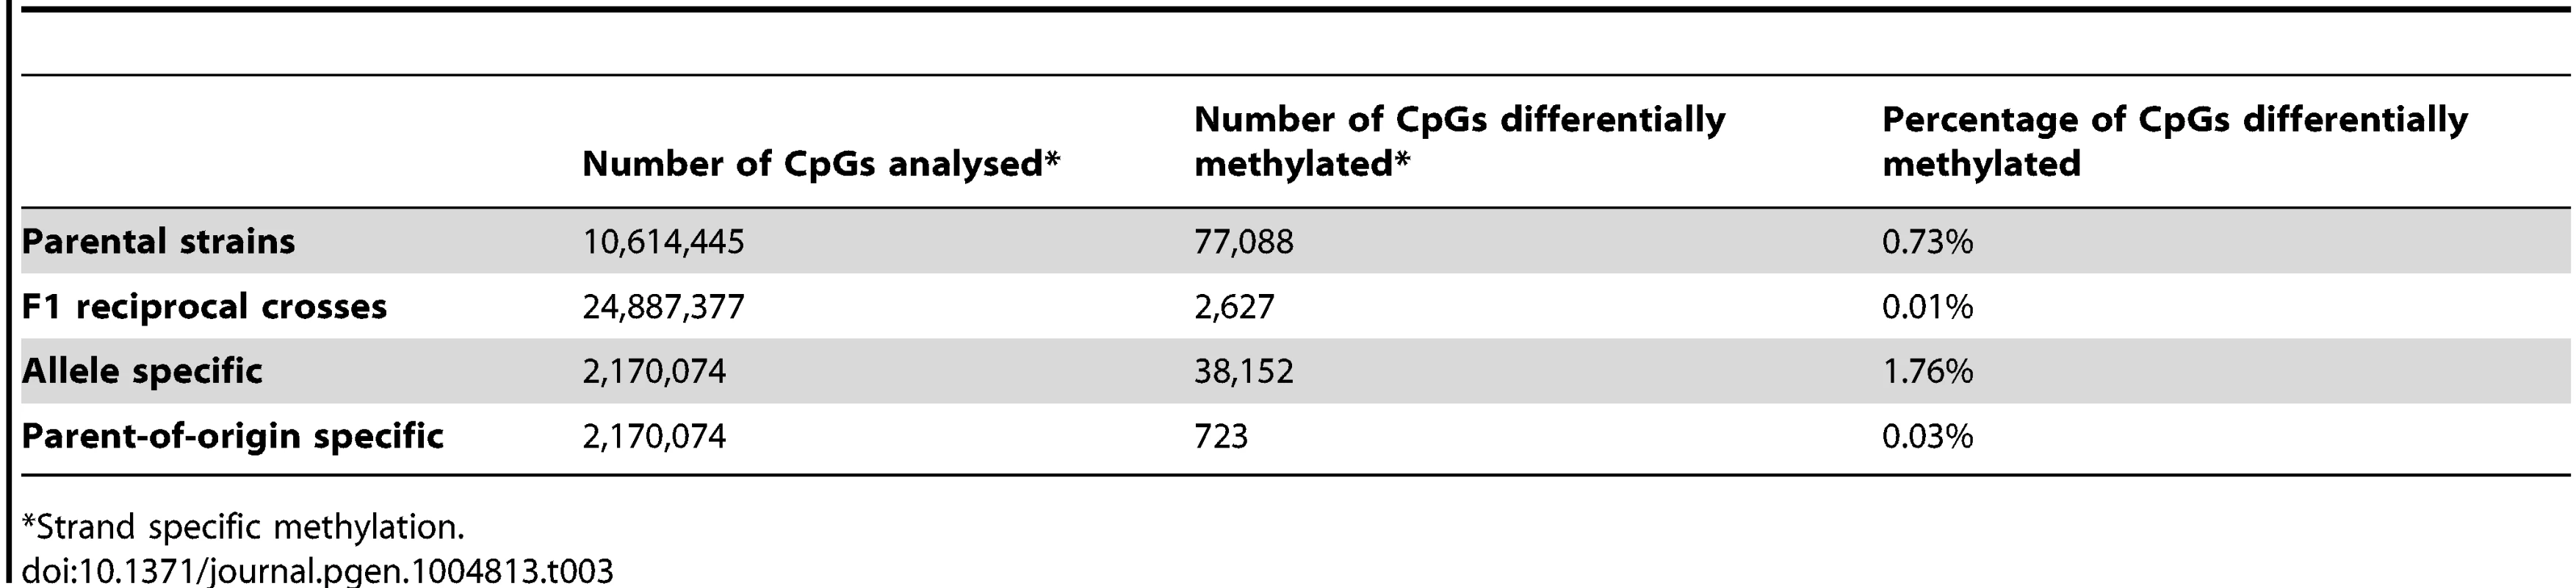 Summary of differential methylation by source of variation.